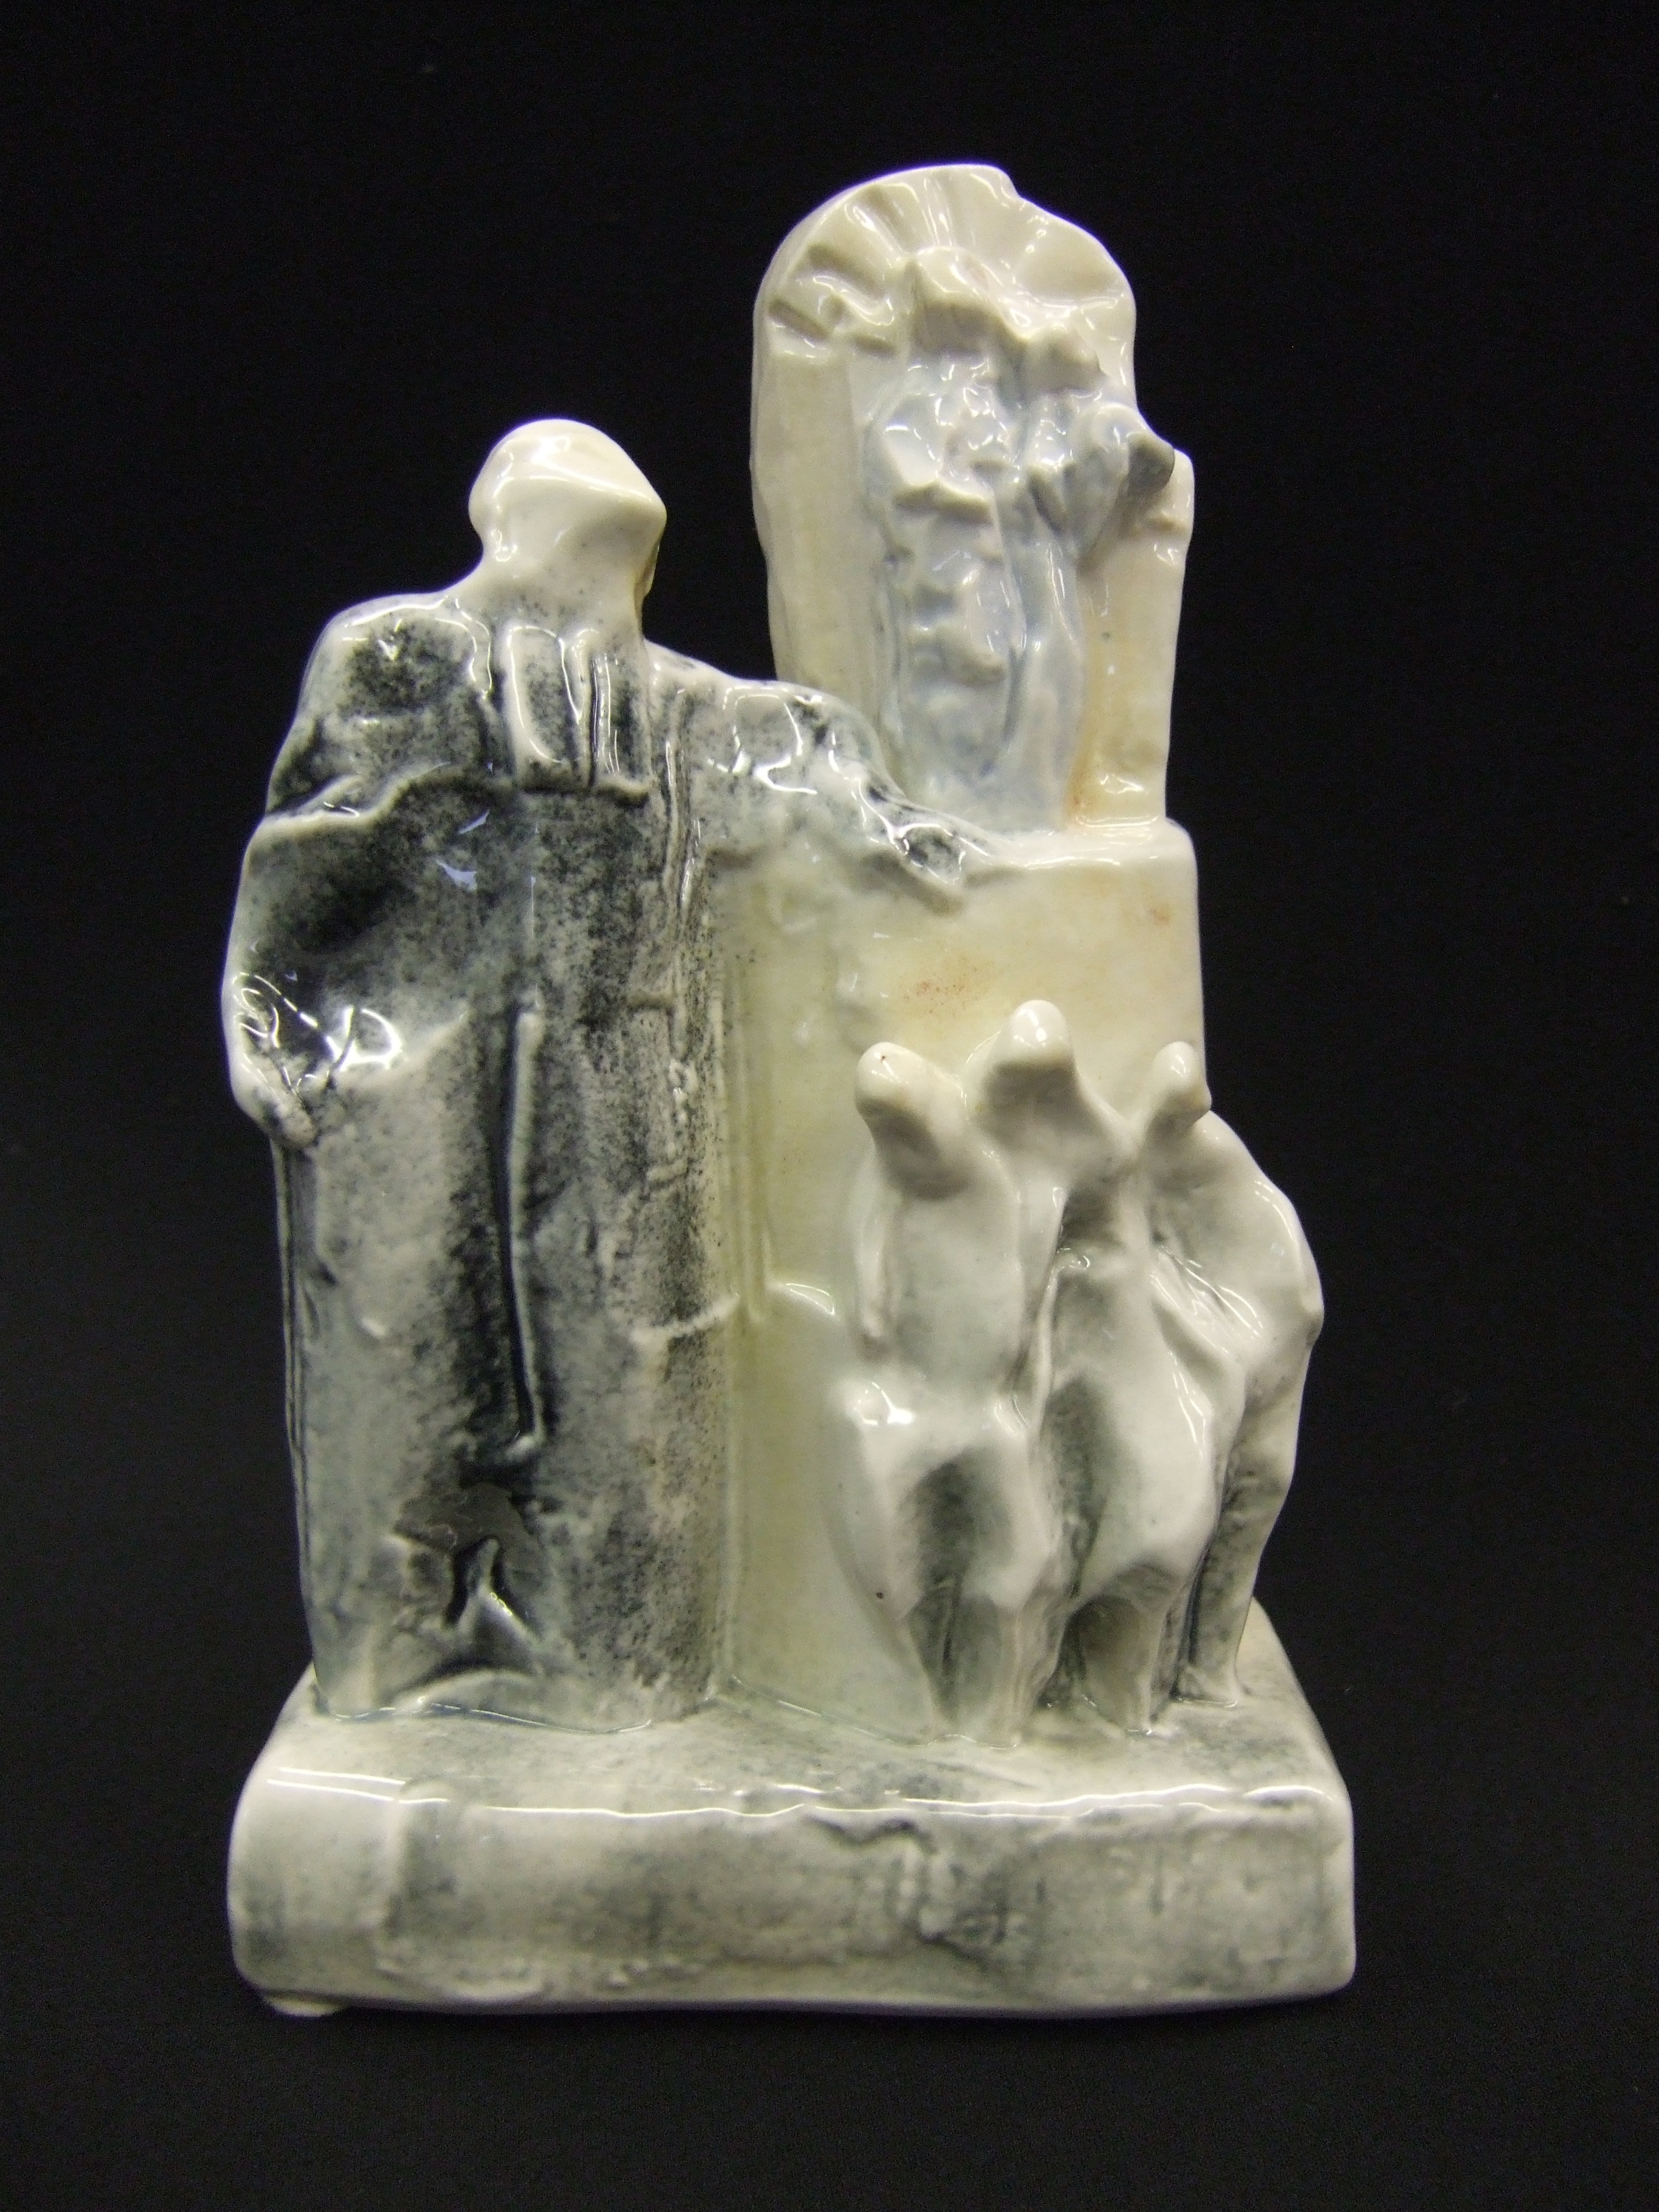 “Father Chaminade” is a work in porcelain by Antonio de Otezia.